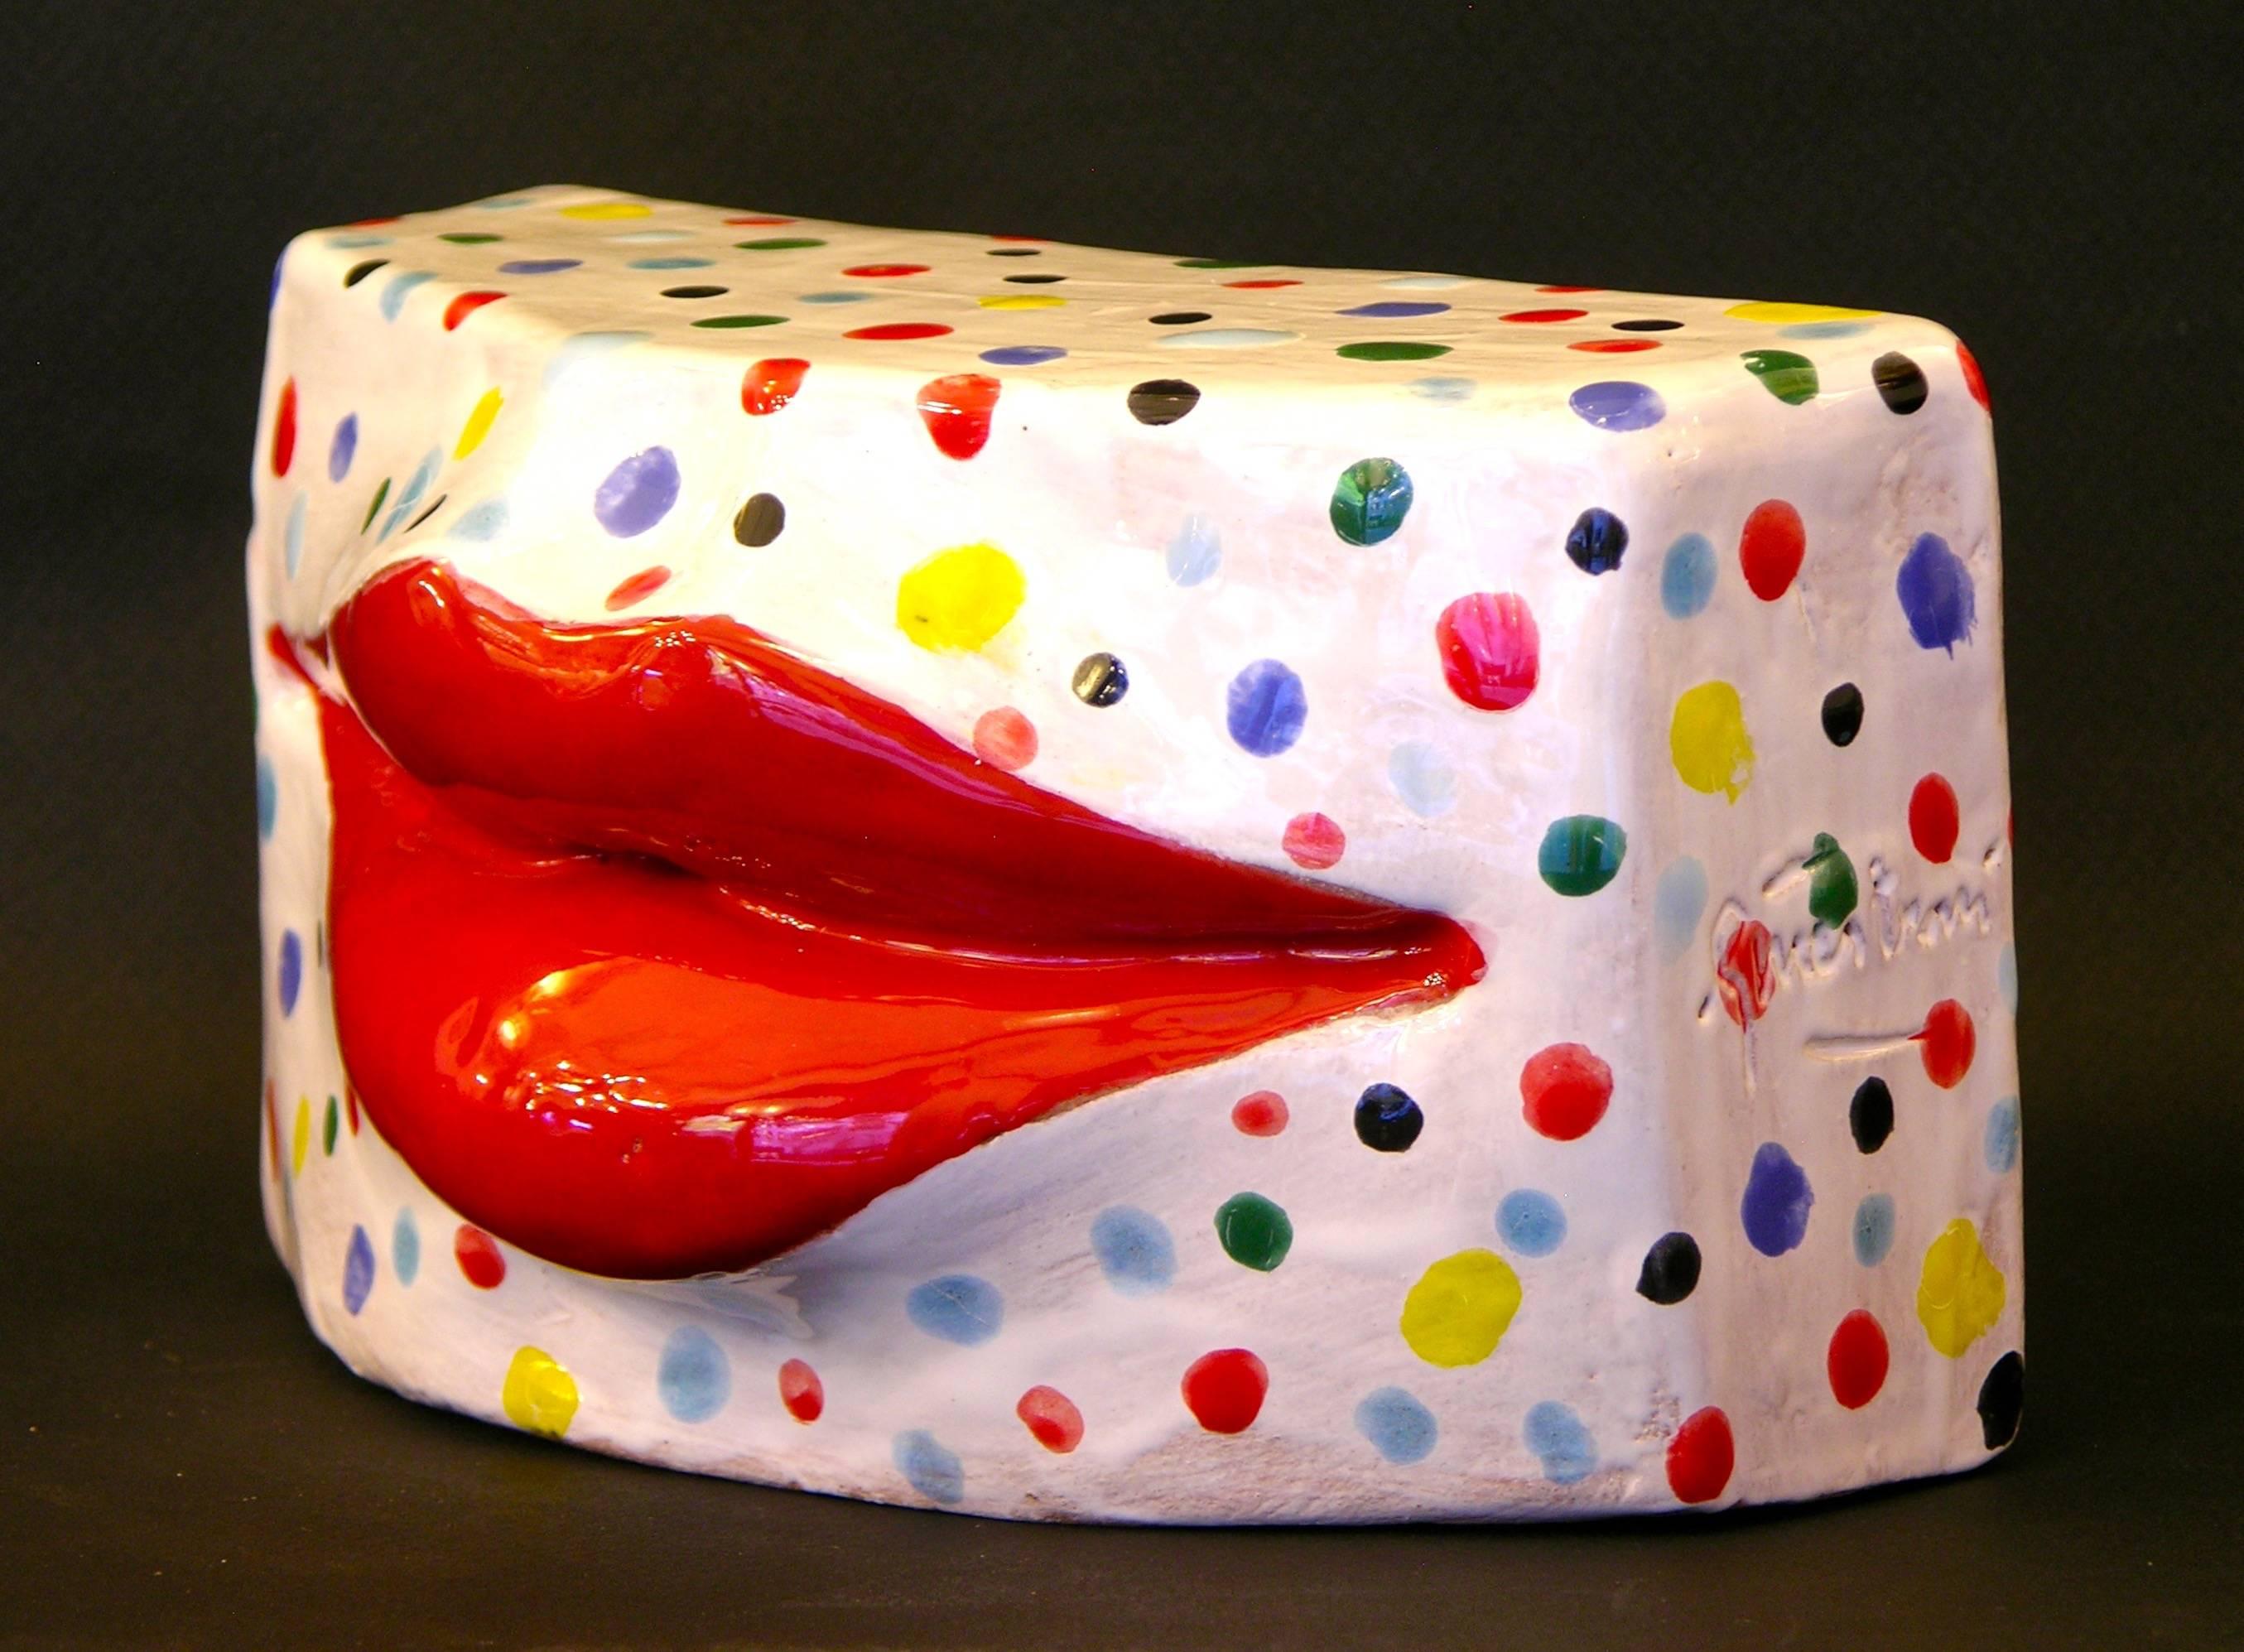 Italian Lipstick Red Lips Modern Terracotta Kiss Sculpture with Multicolor Dots on White